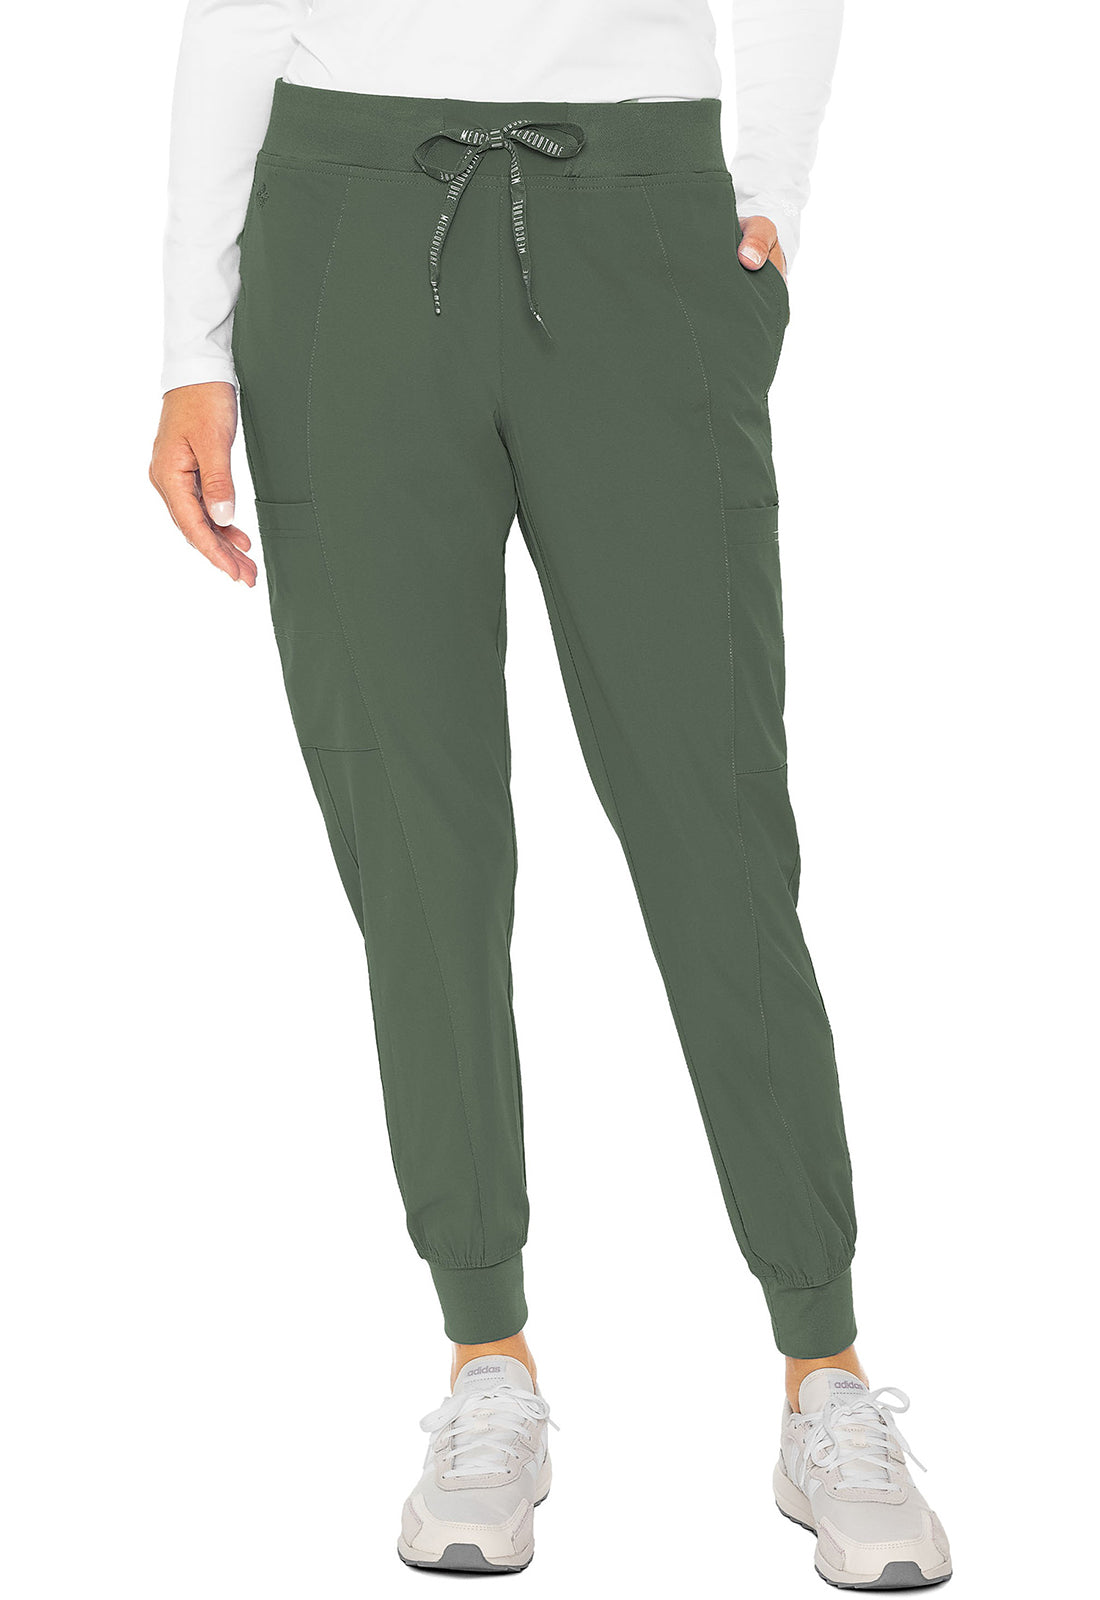 Waves Pants – Couture New #8721 Scrubs Peaches Med Jogger